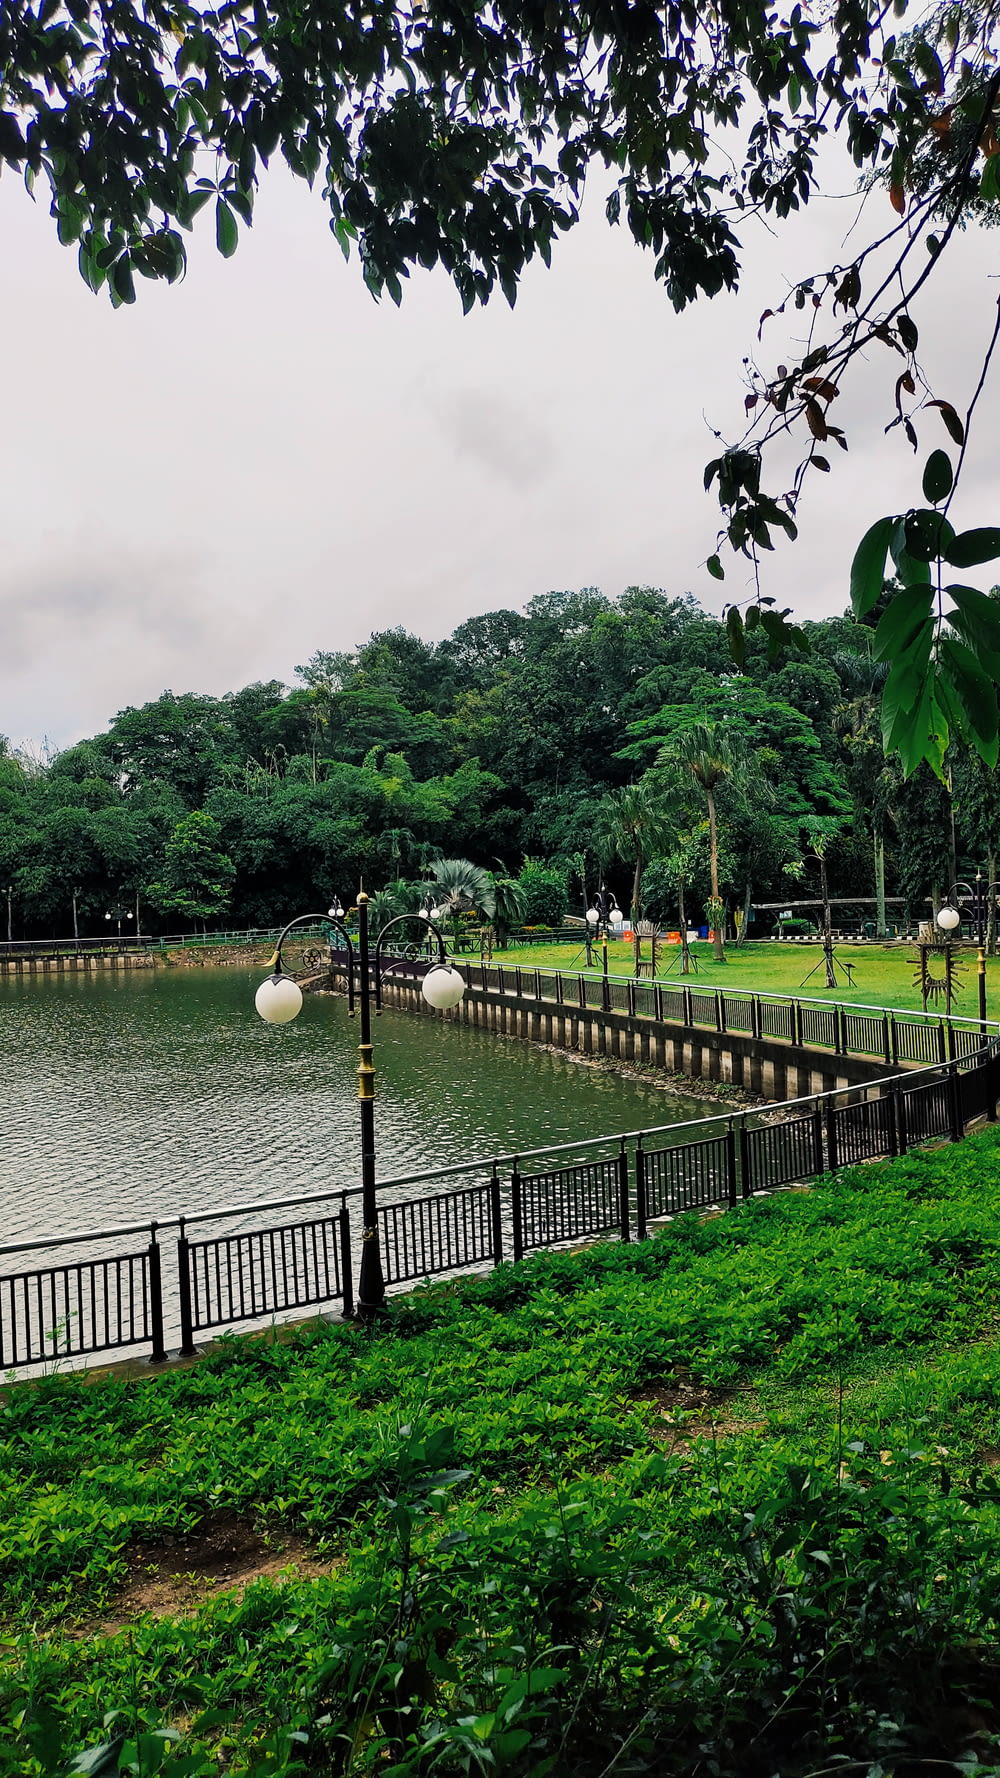 a large body of water sitting next to a lush green park